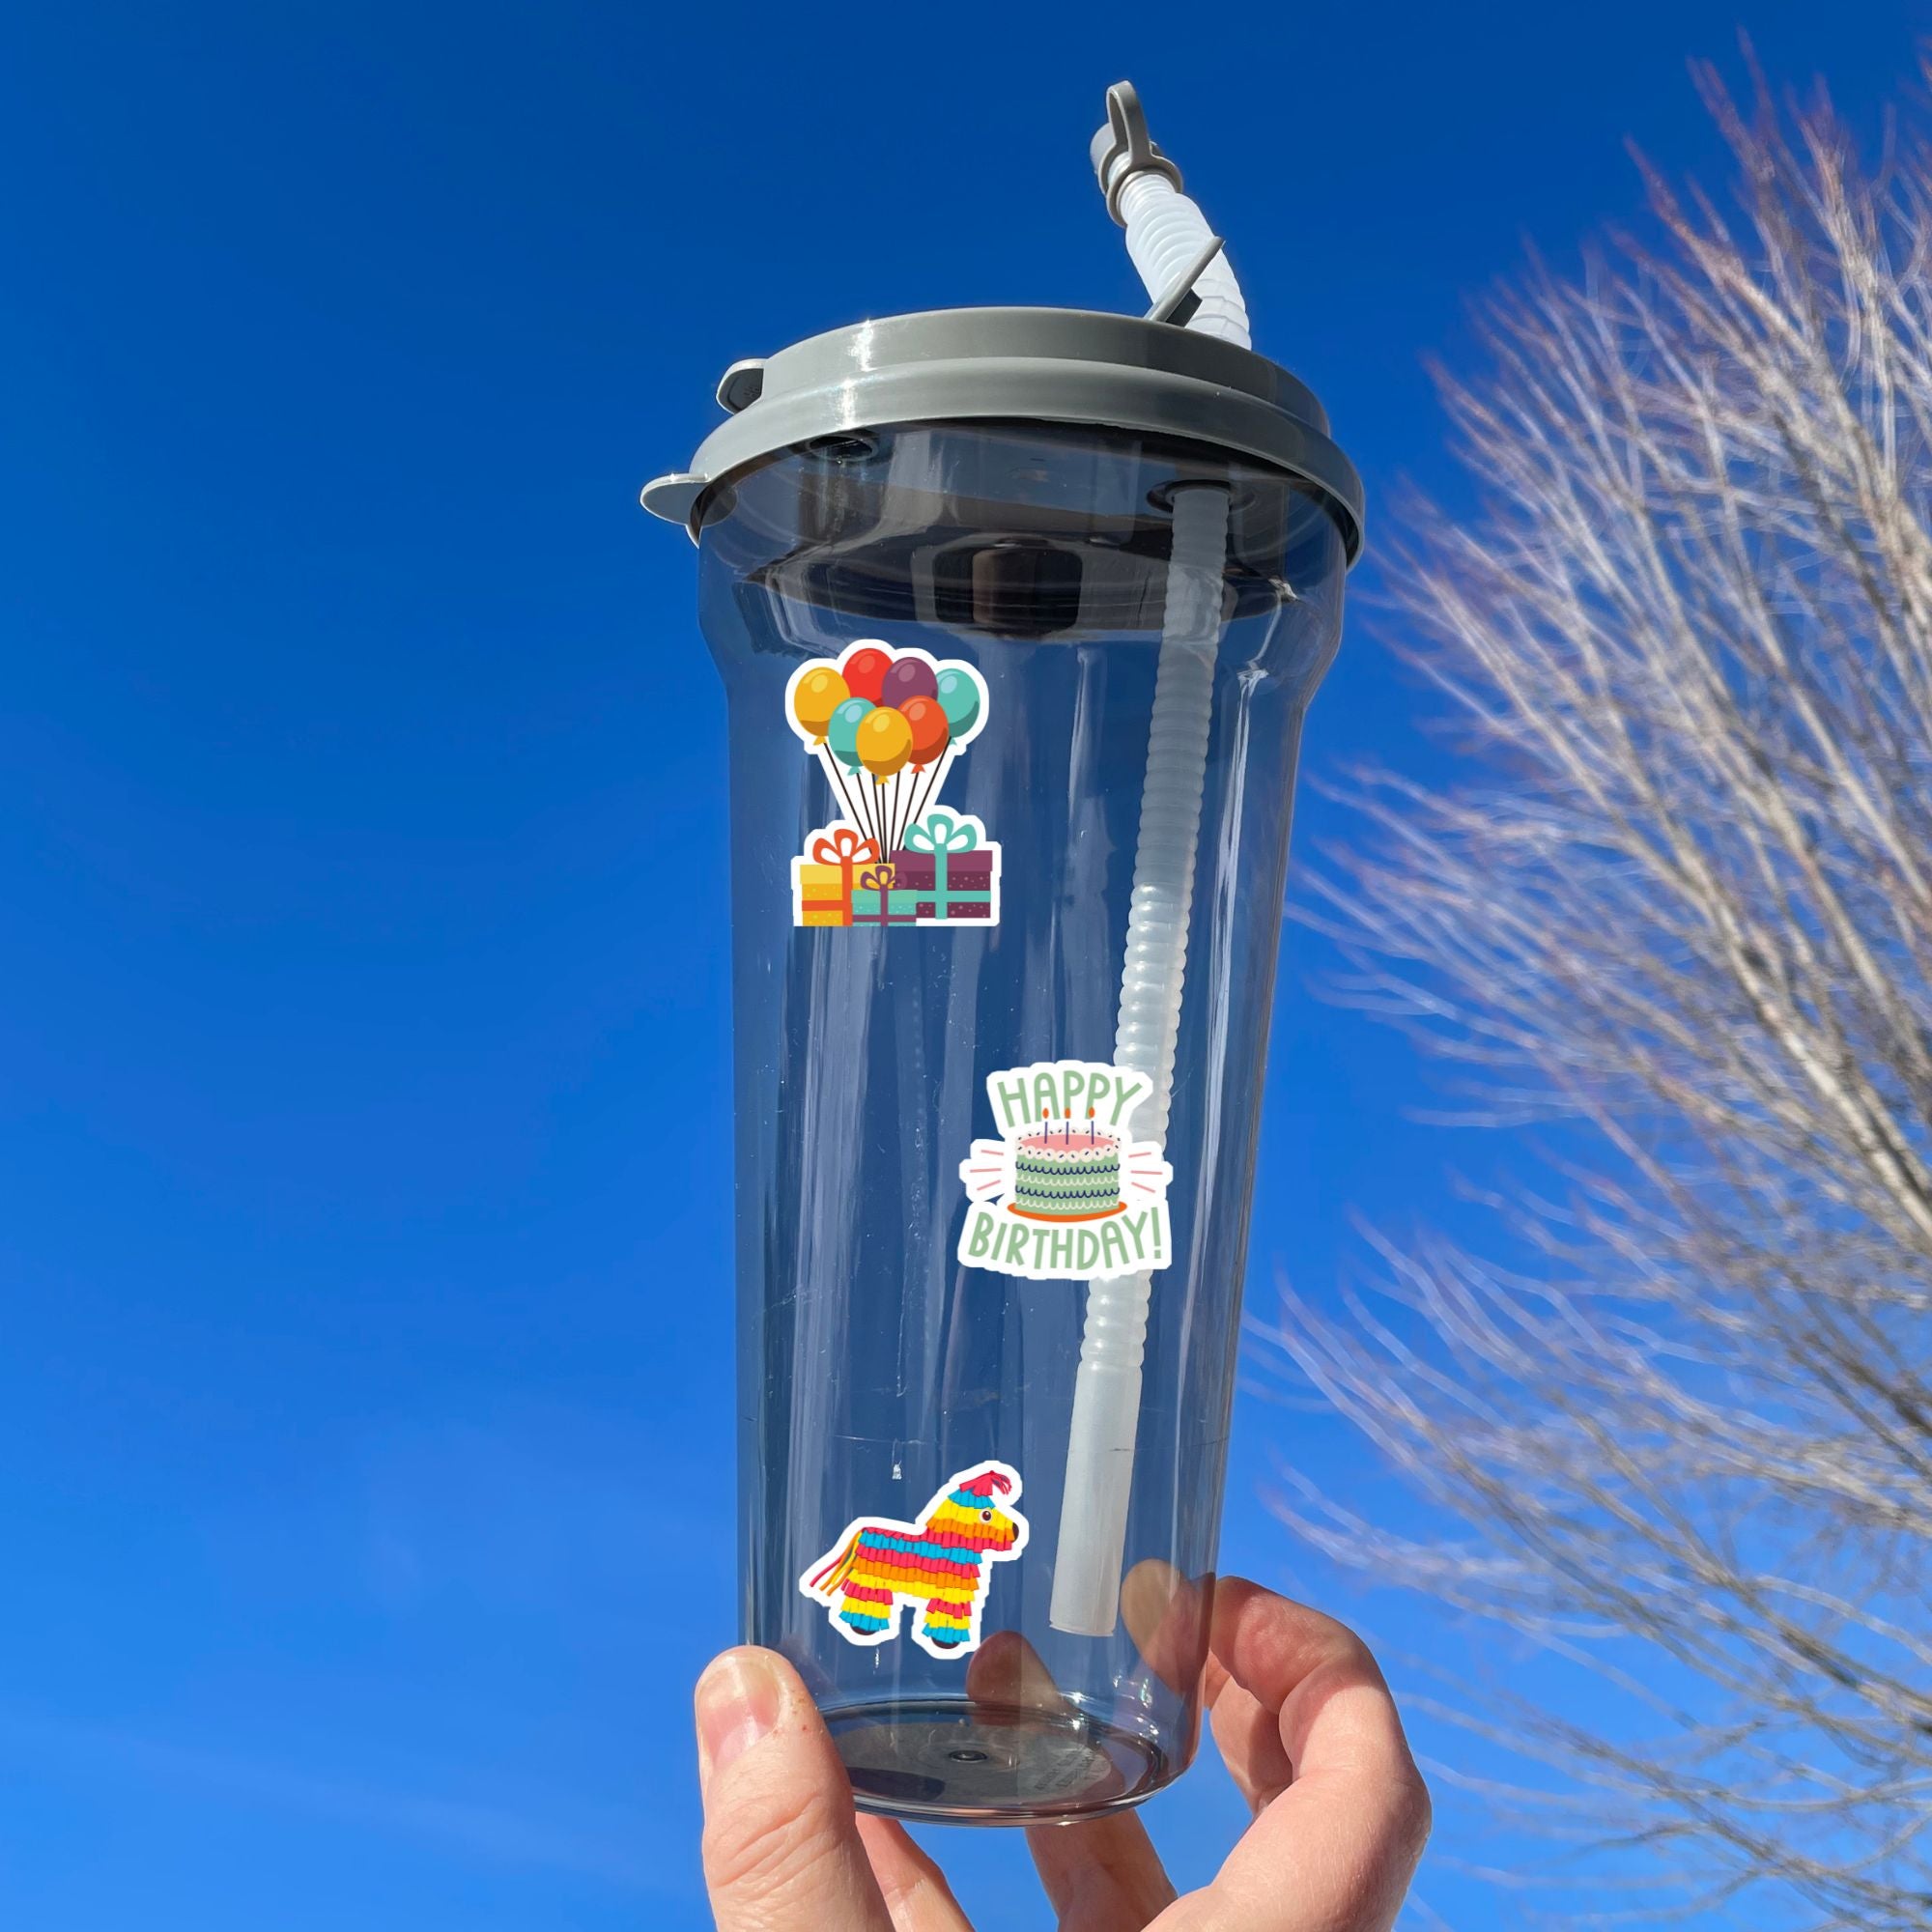 This birthday sticker sheet has a sparkle overlay with stickers showing all your favorite birthday celebration items like: Birthday cakes, presents, balloons, a piñata, birthday hats, and streamers. This image is of a water bottle with a birthday cake, presents and balloons, and a piñata on it. 